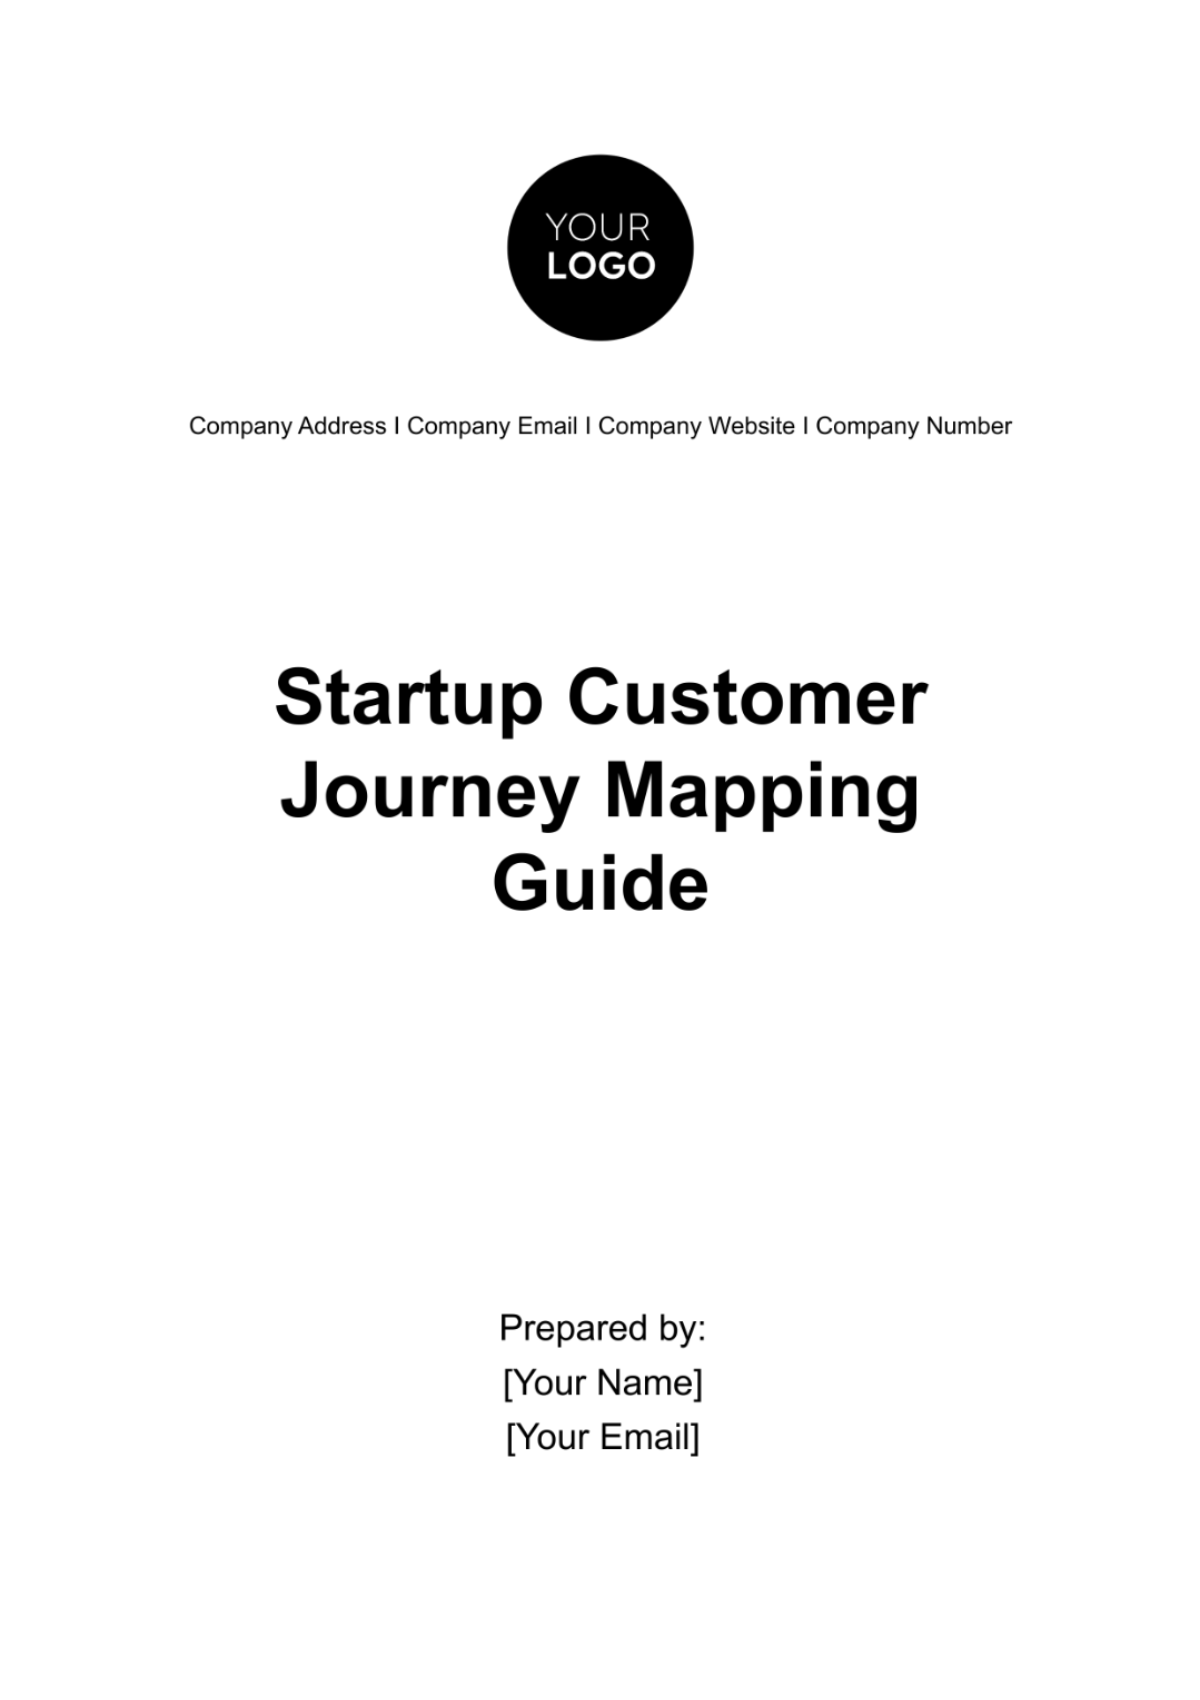 Startup Customer Journey Mapping Guide Template